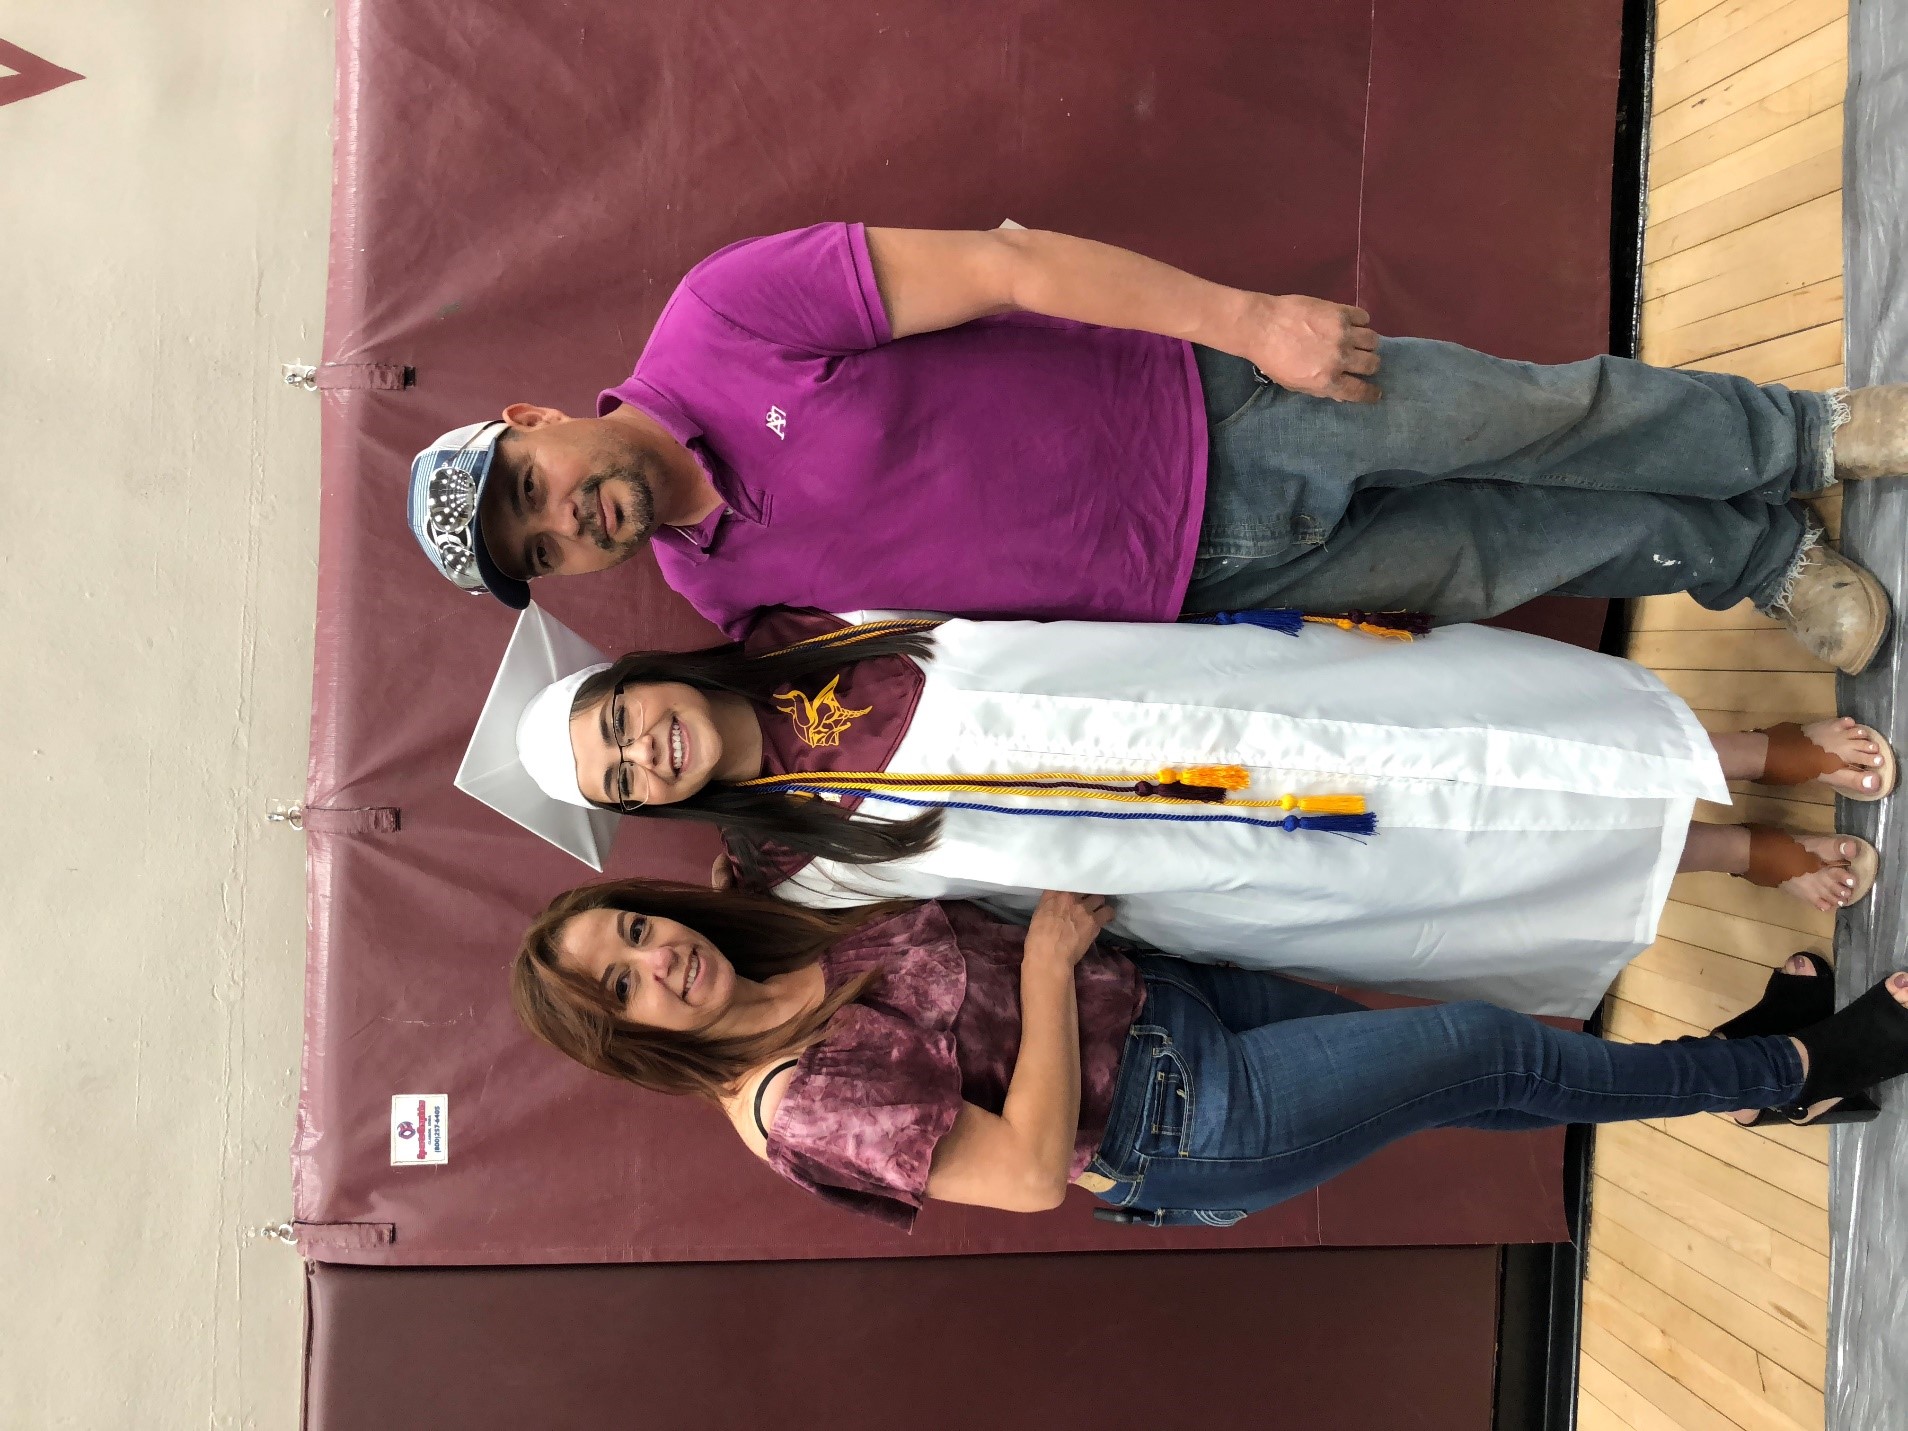 Arlin Arpero stands in a gymnasium, smiling at the camera and wearing a white cap and gown with tassels. A woman wearing a maroon shirt and jeans stands to Arlin's left. A man wearing a maroon shirt and a cap stands to Arlin's right.